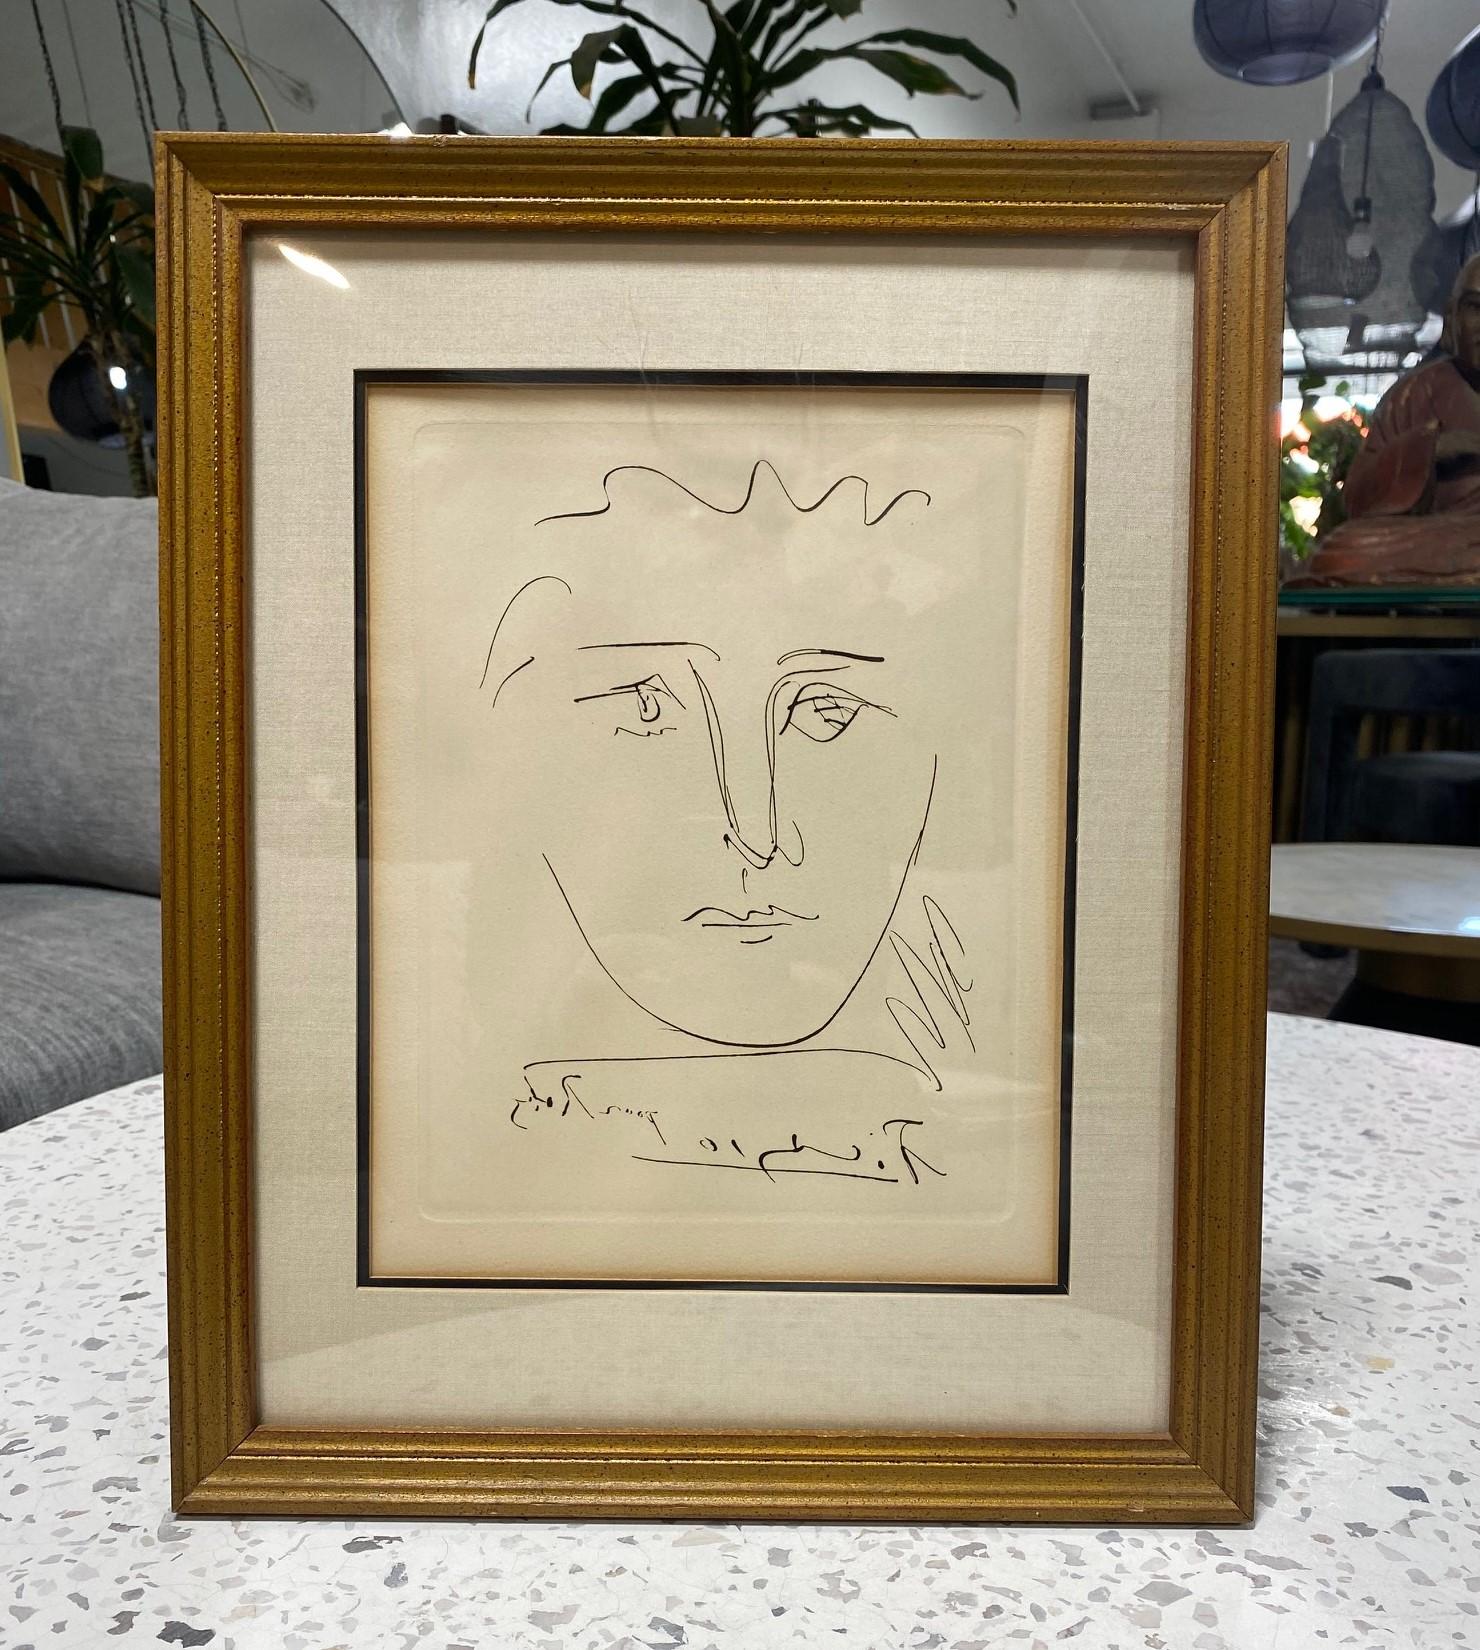 A fantastic original etching by famed Spanish artist Pablo Picasso titled 